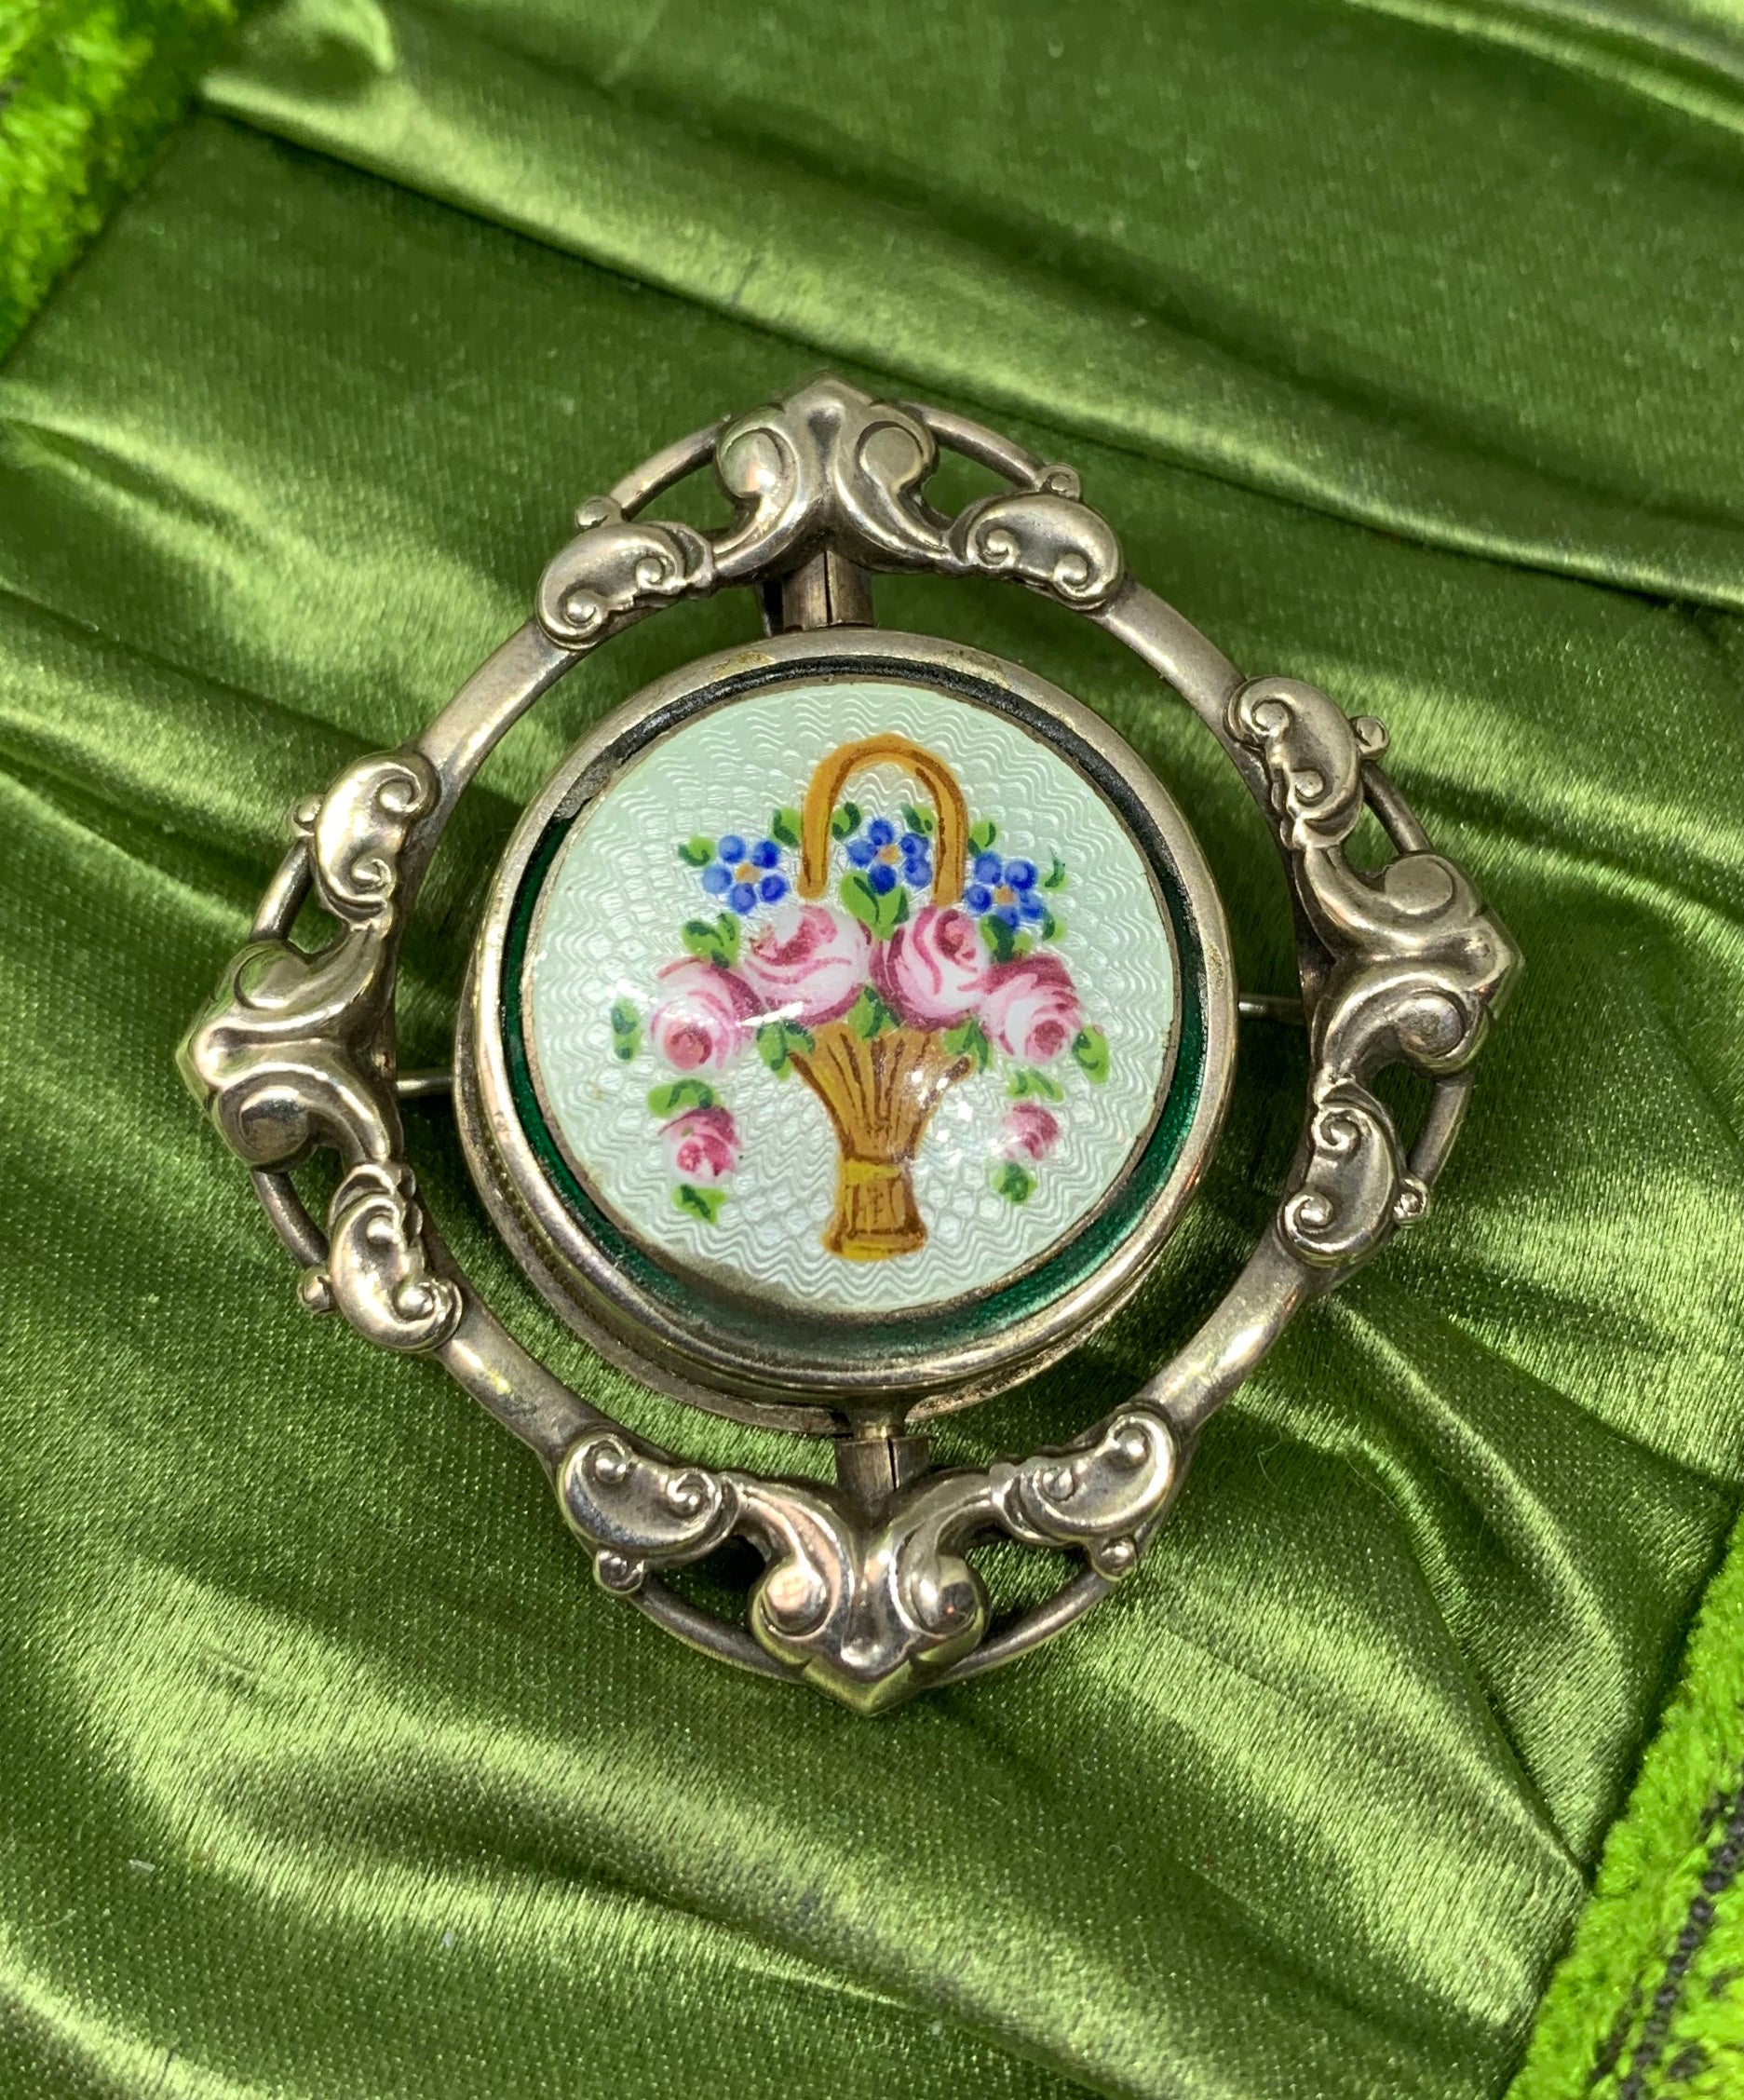 This is a wonderful antique Edwardian - Art Deco Locket Pendant or Brooch with a gorgeous Guilloche Enamel flower basket motif on a delicate pale blue-green Guilloche Enamel background over Sterling Silver.  The locket portion is on a swivel